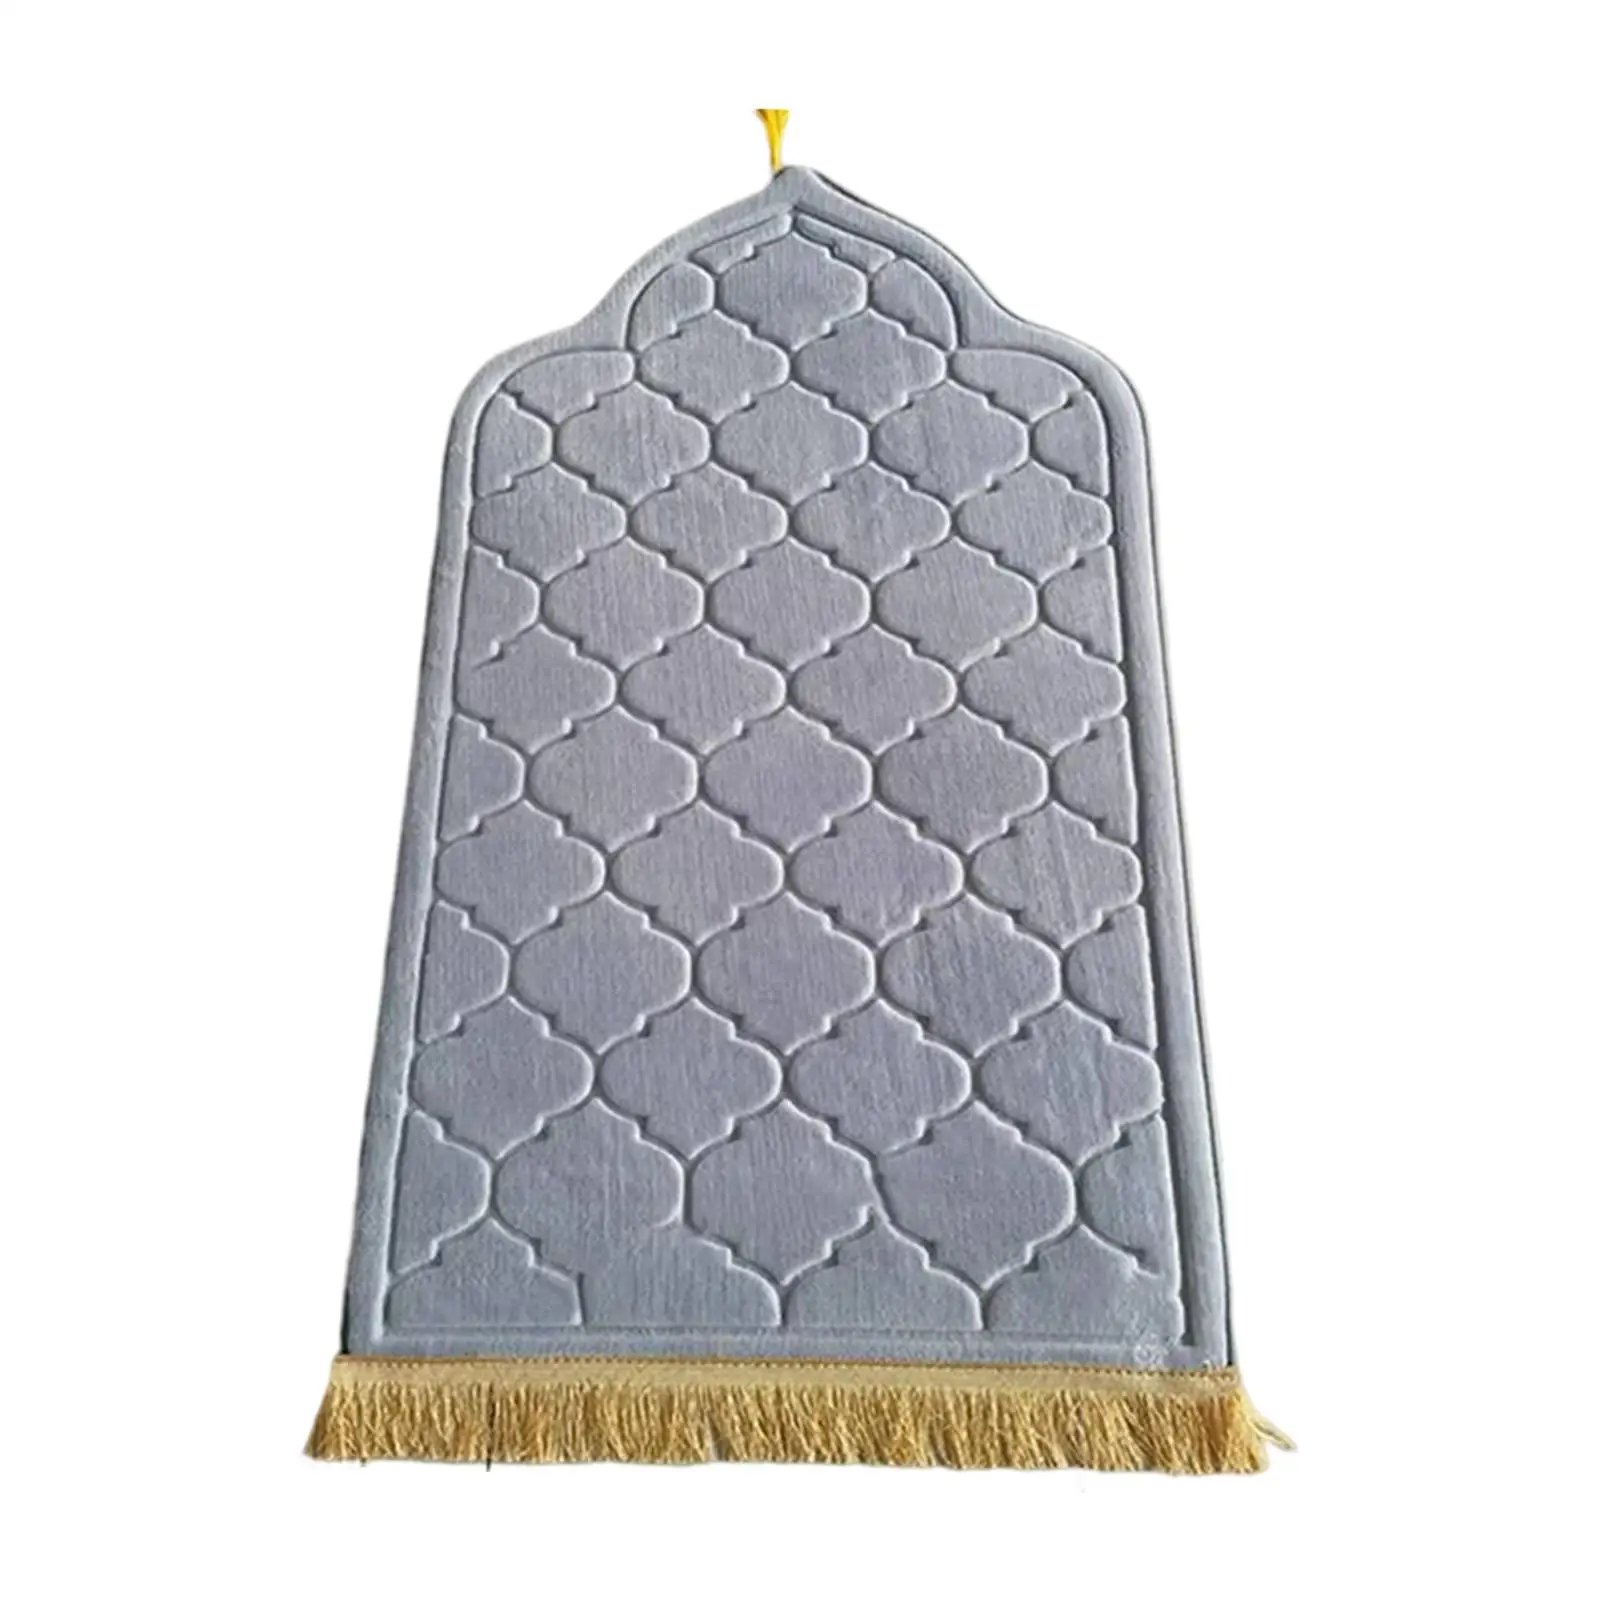 Portable Prayer Mat Area Rugs Collectible Blanket for Bedroom Home Wedding